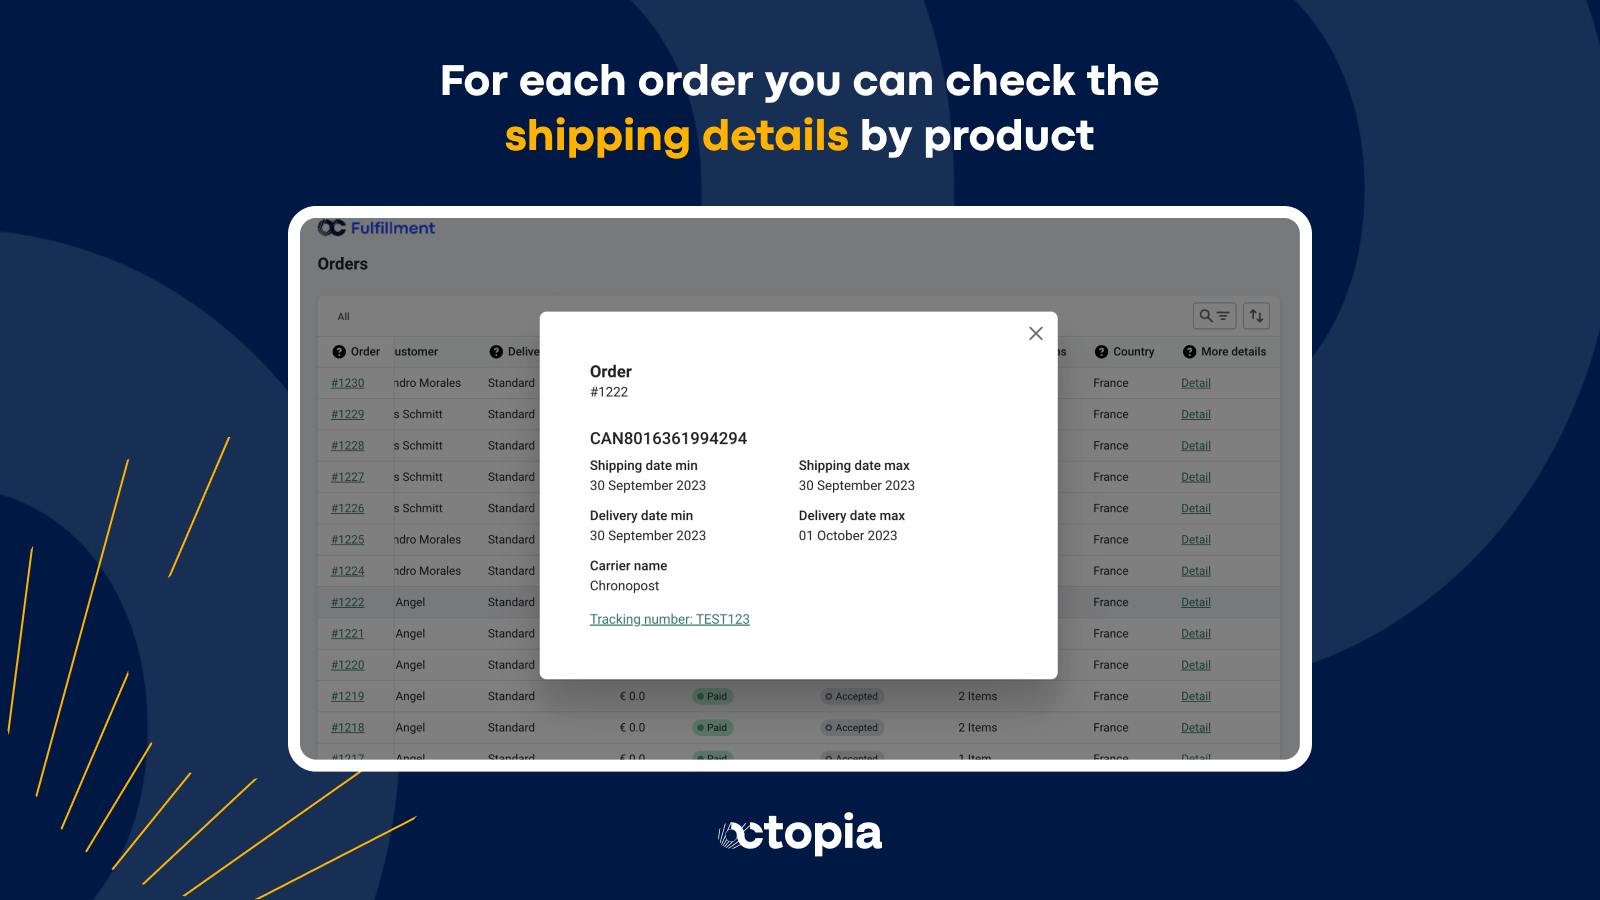 For each order you can check the shipping details by product